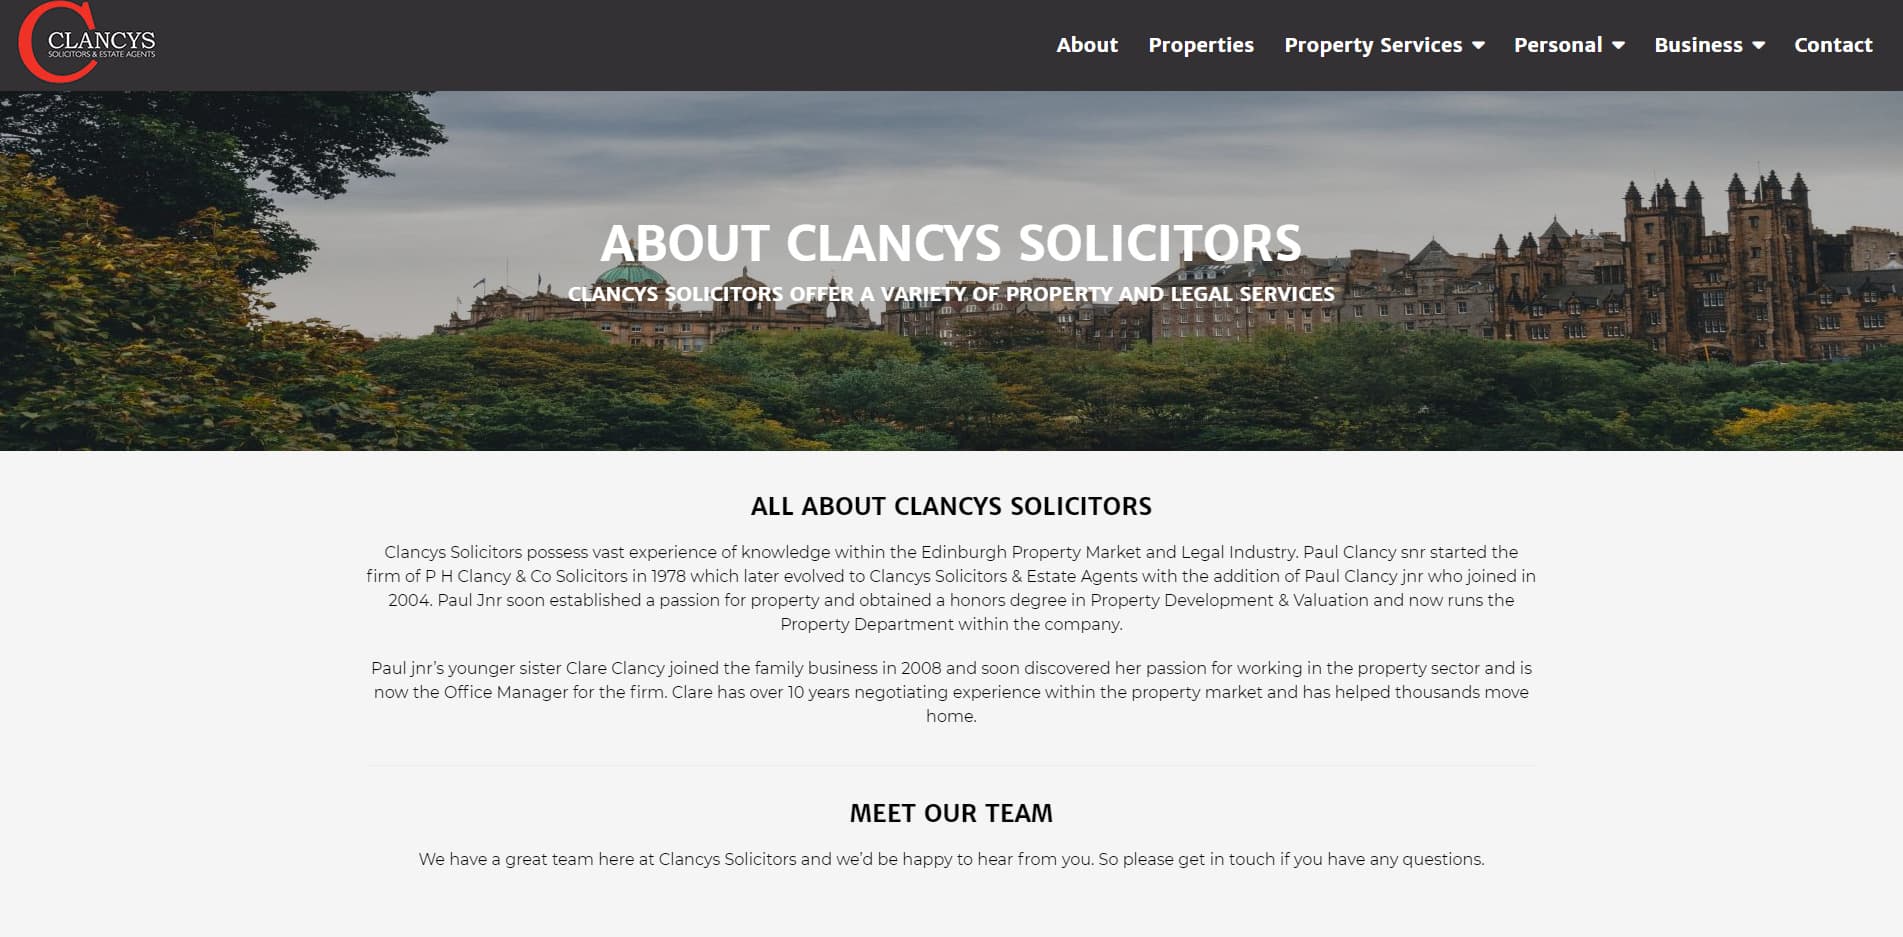 Clancys Solicitors About 2018